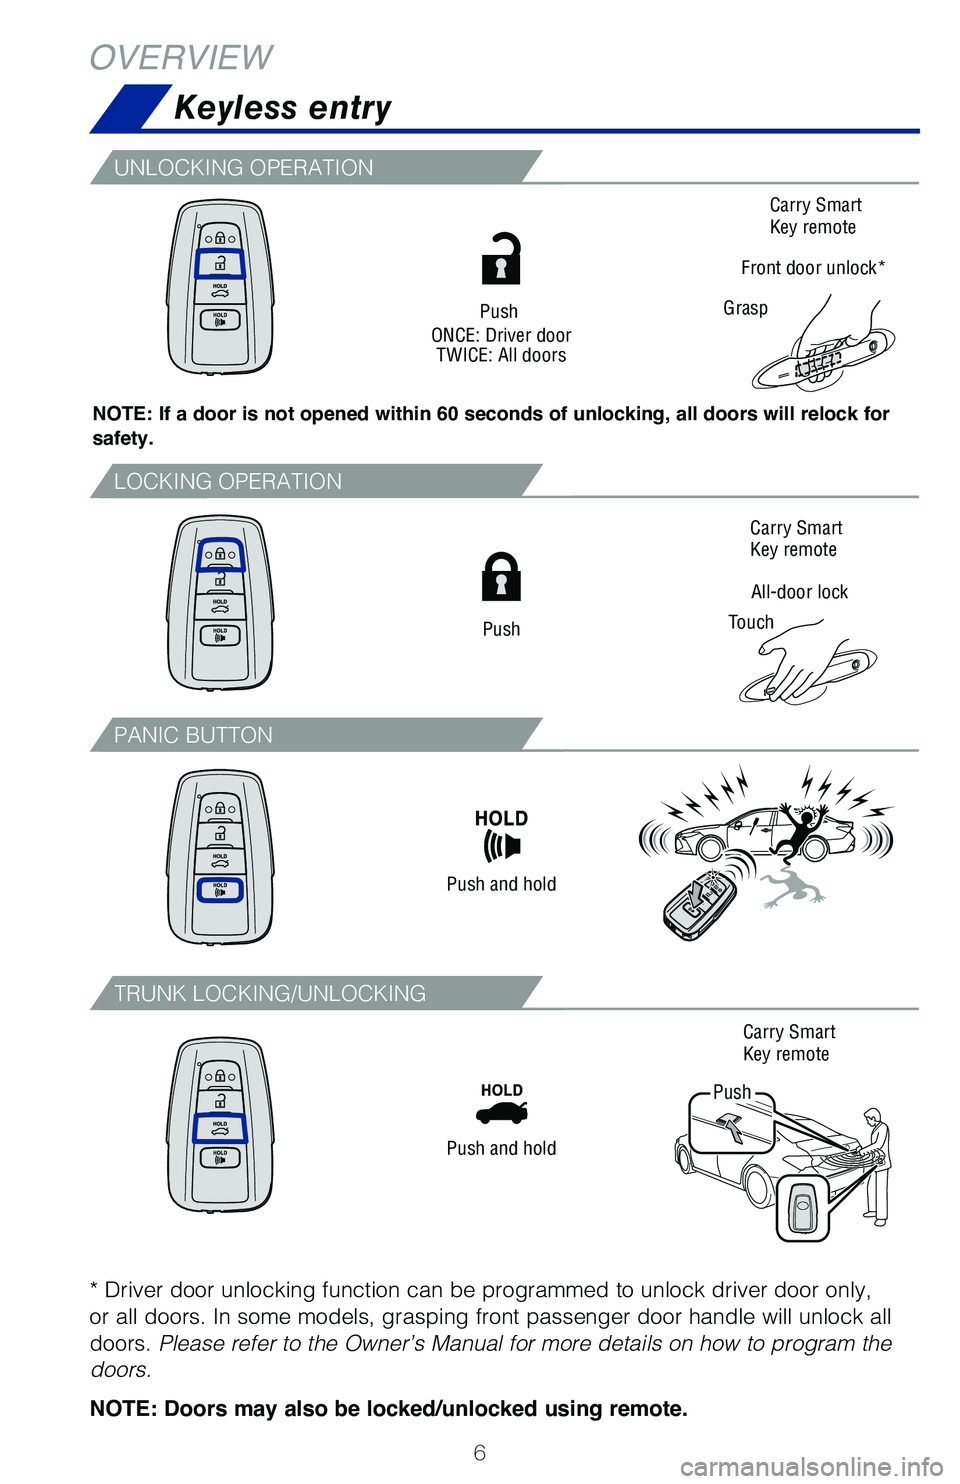 TOYOTA AVALON 2020  Owners Manual (in English) 6
Keyless entry
OVERVIEW
NOTE: If a door is not opened within 60 seconds of unlocking, all doors will relock for 
safety.
Push
ONCE: Driver door TWICE: All doors
All-door lock
Touch Carry Smart  
Key 